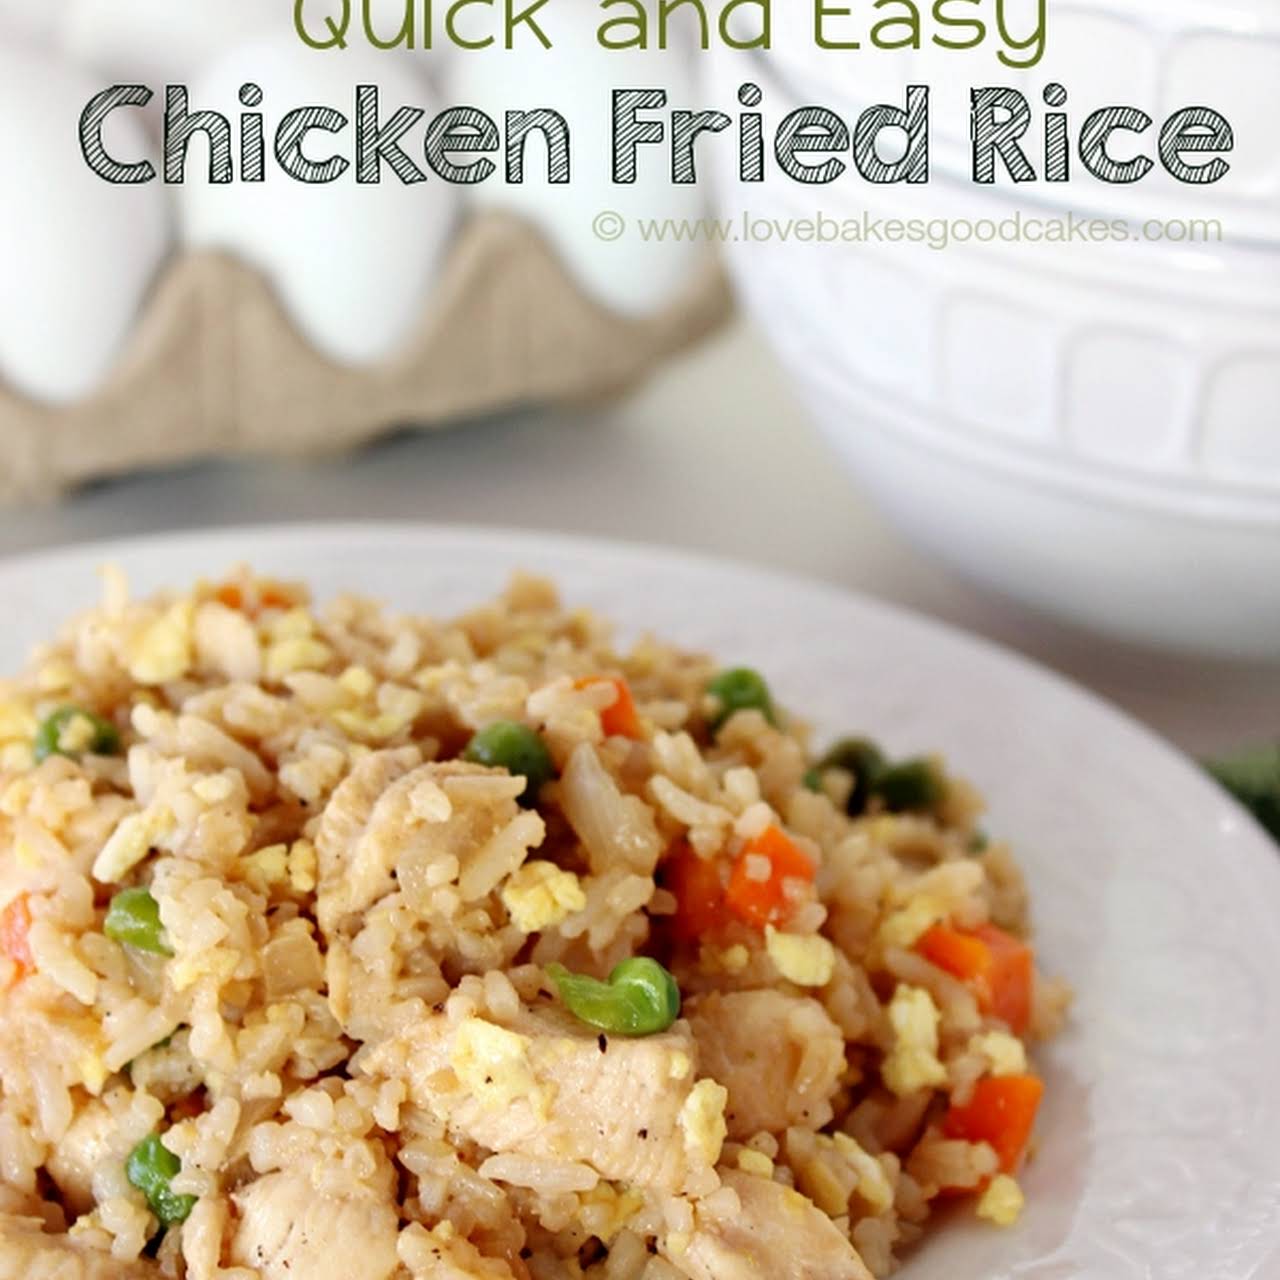  sharp and Easy Chicken Fried Rice